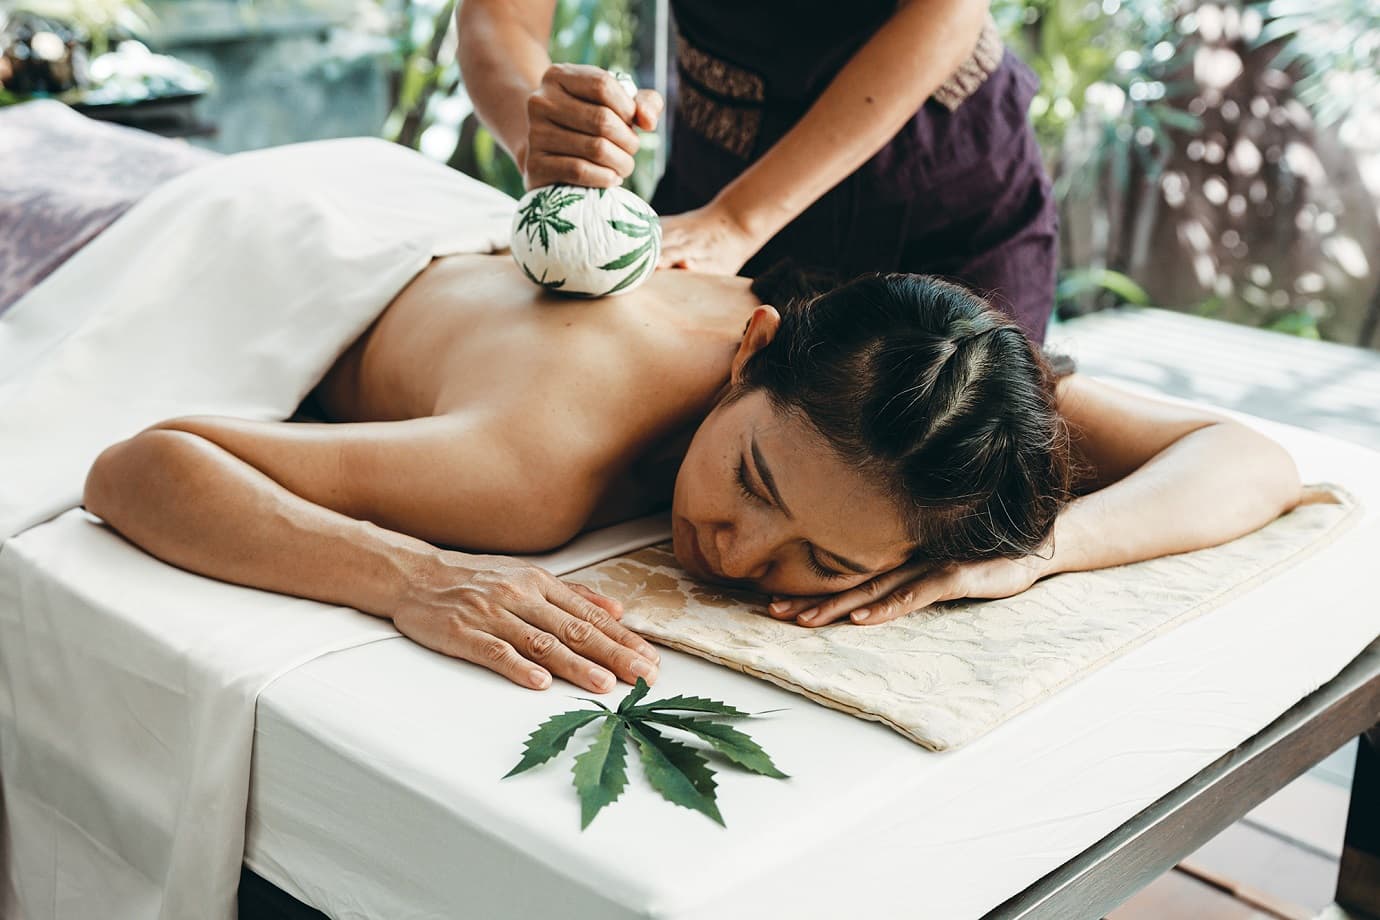 CBD oil has made its way onto spa menus in Thailand, such as this 90-minute Cannabis Stress- Release Journey treatment at the Anantara Bophut Koh Samui Resort.